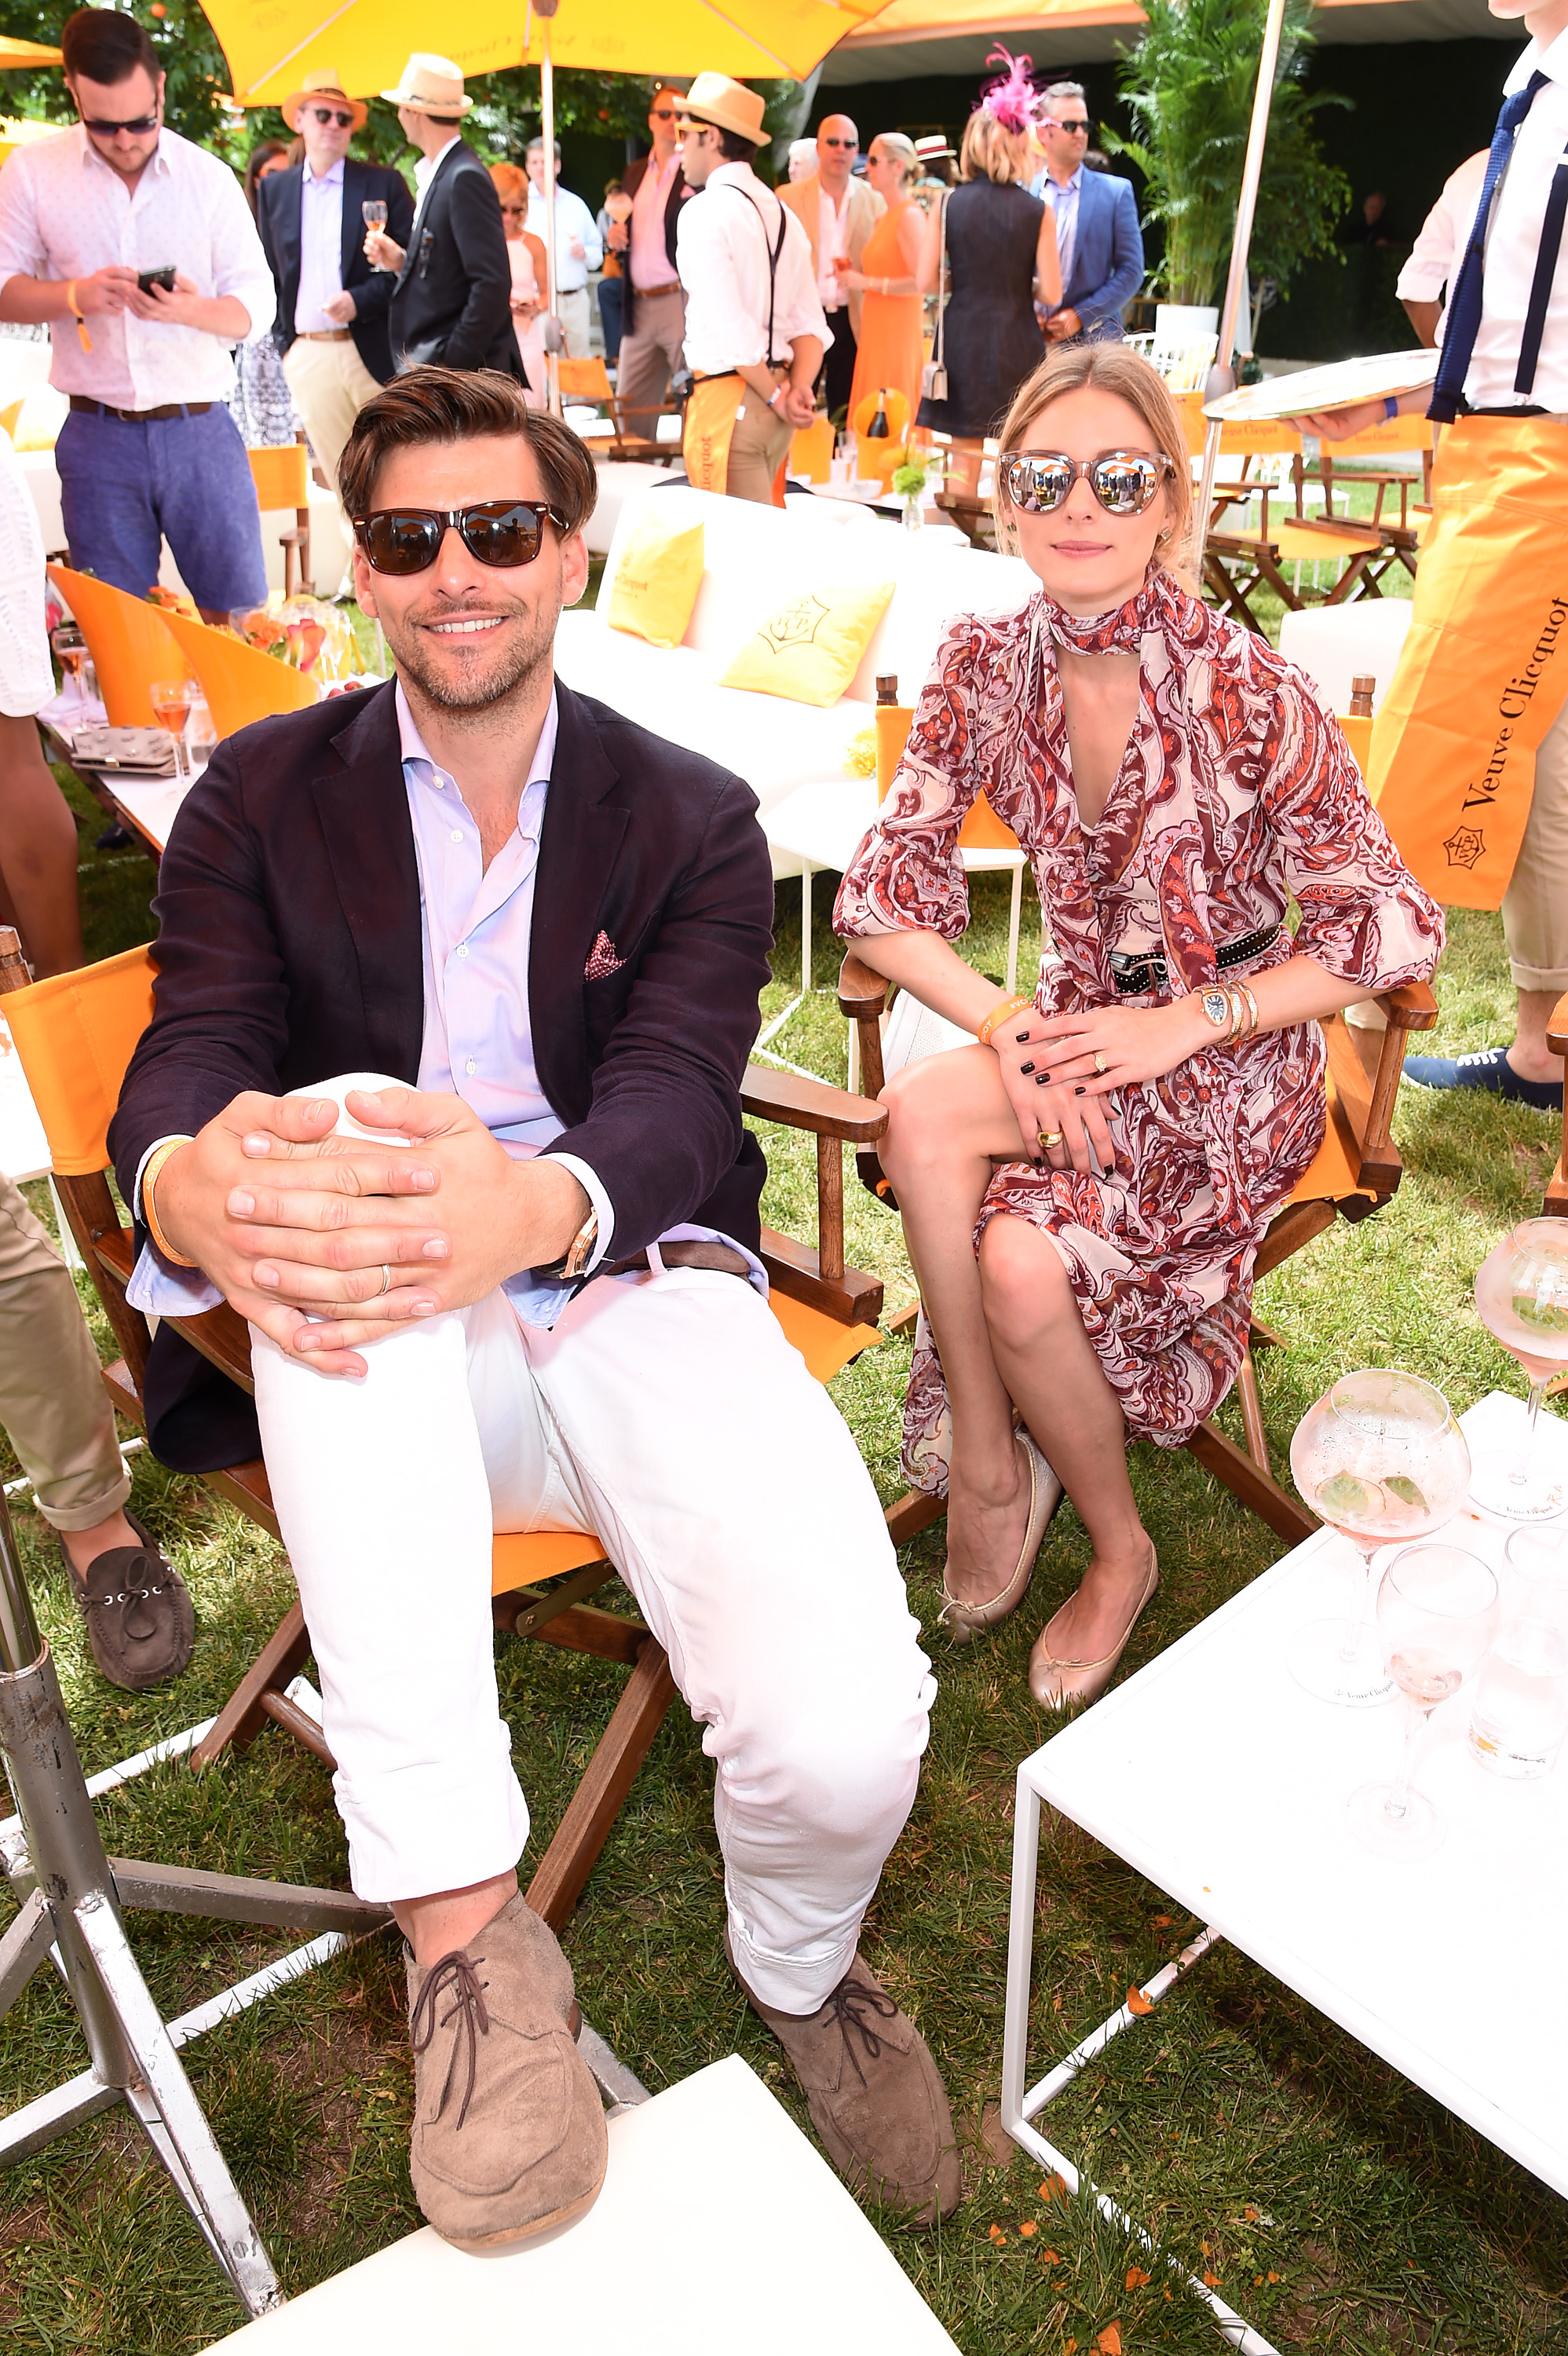 JERSEY CITY, NJ - JUNE 04:  Johannes Huebl (L) and Olivia Palermo attend the Ninth Annual Veuve Clicquot Polo Classic at Liberty State Park on June 4, 2016 in Jersey City, New Jersey.  (Photo by Jamie McCarthy/Getty Images for Veuve Clicquot)